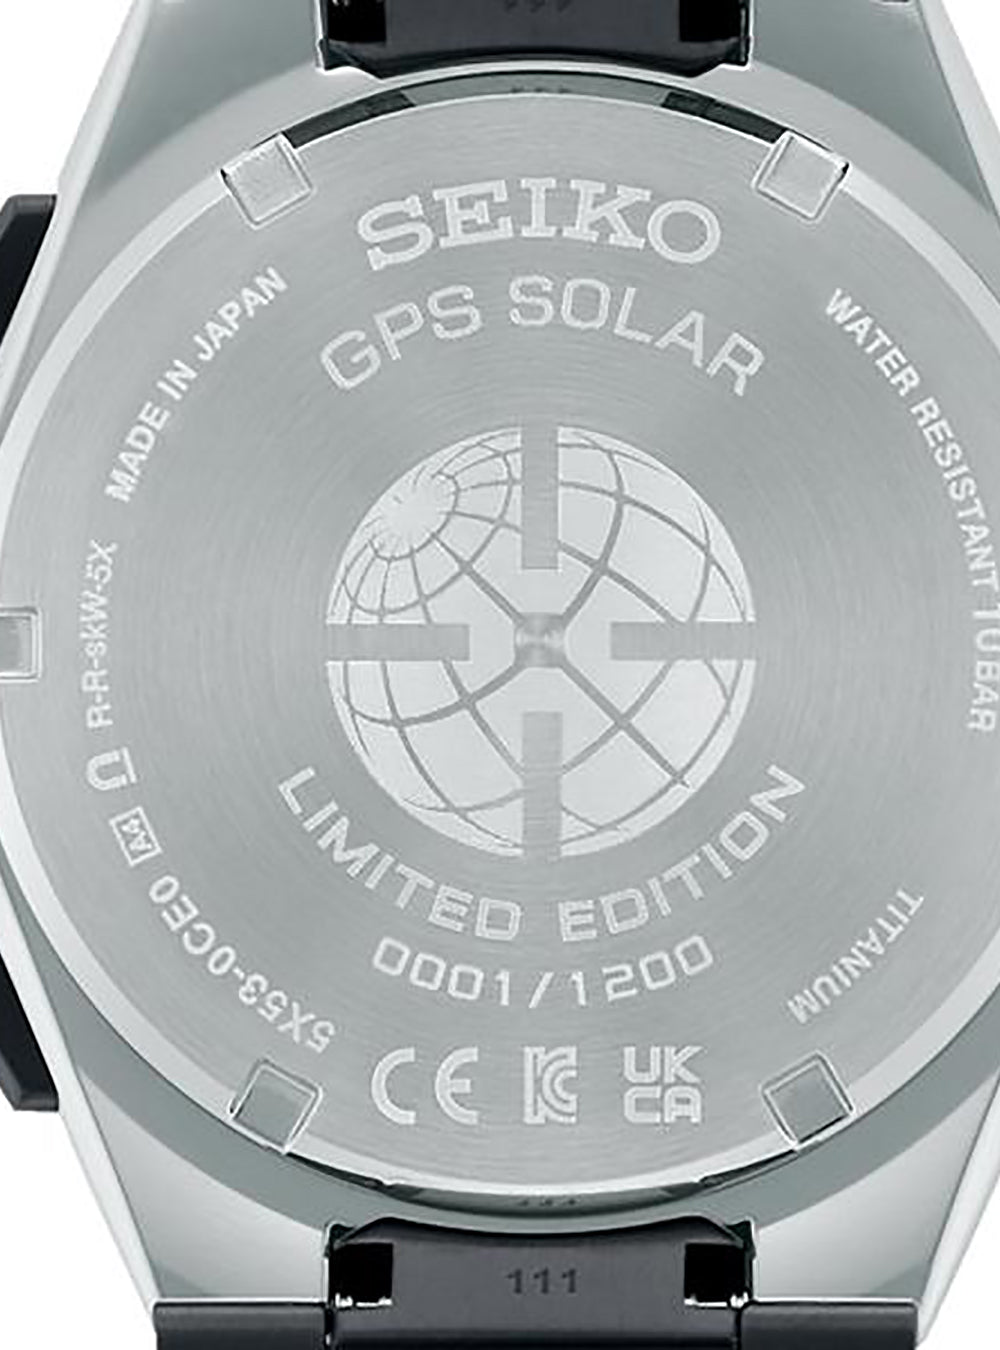 SEIKO WATCH ASTRON NEXTER GPS SOLAR 2023 LIMITED EDITION SSH139 / SBXC139 MADE IN JAPAN JDMWRISTWATCHjapan-select